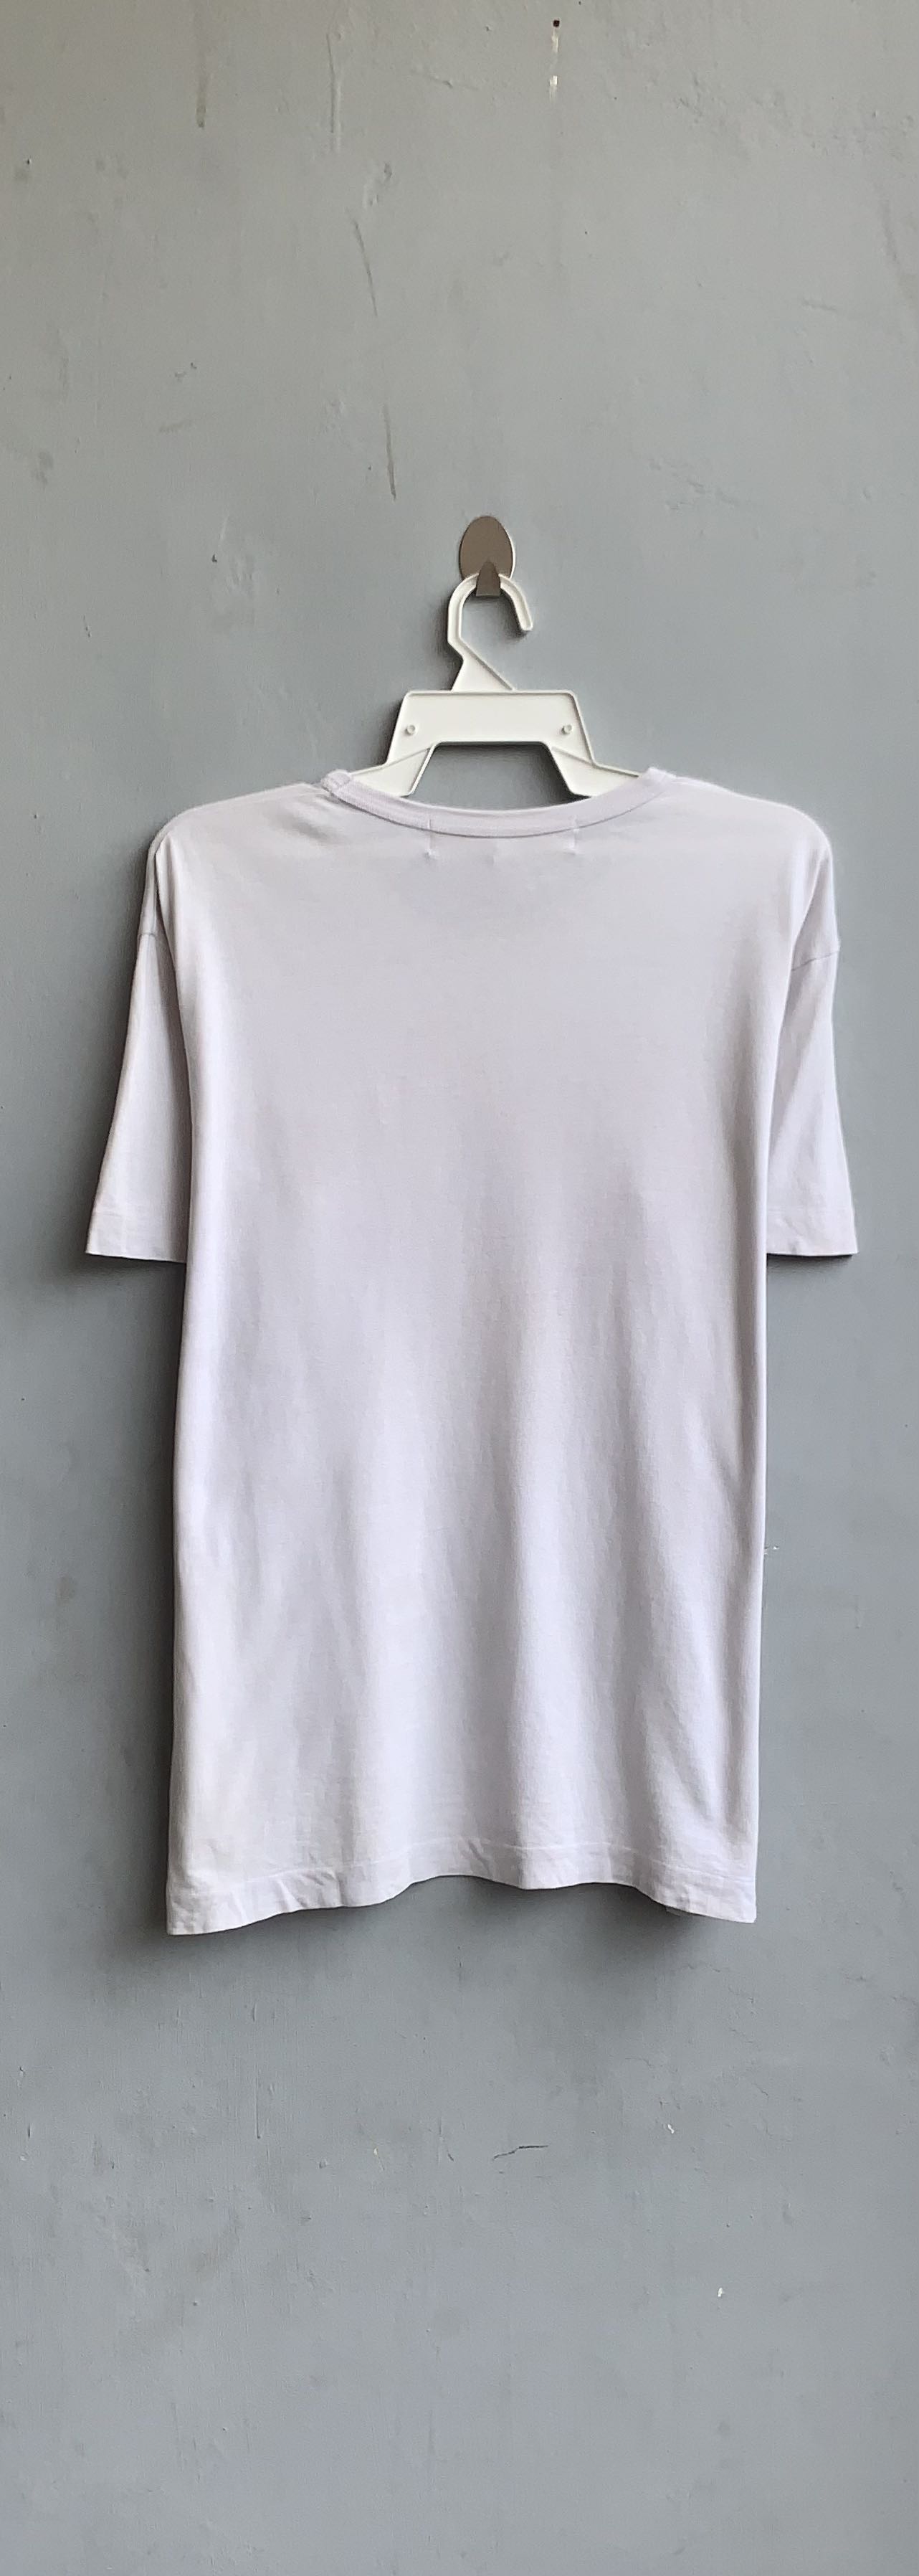 Vintage Comme Des Garcons Play Tee - 5